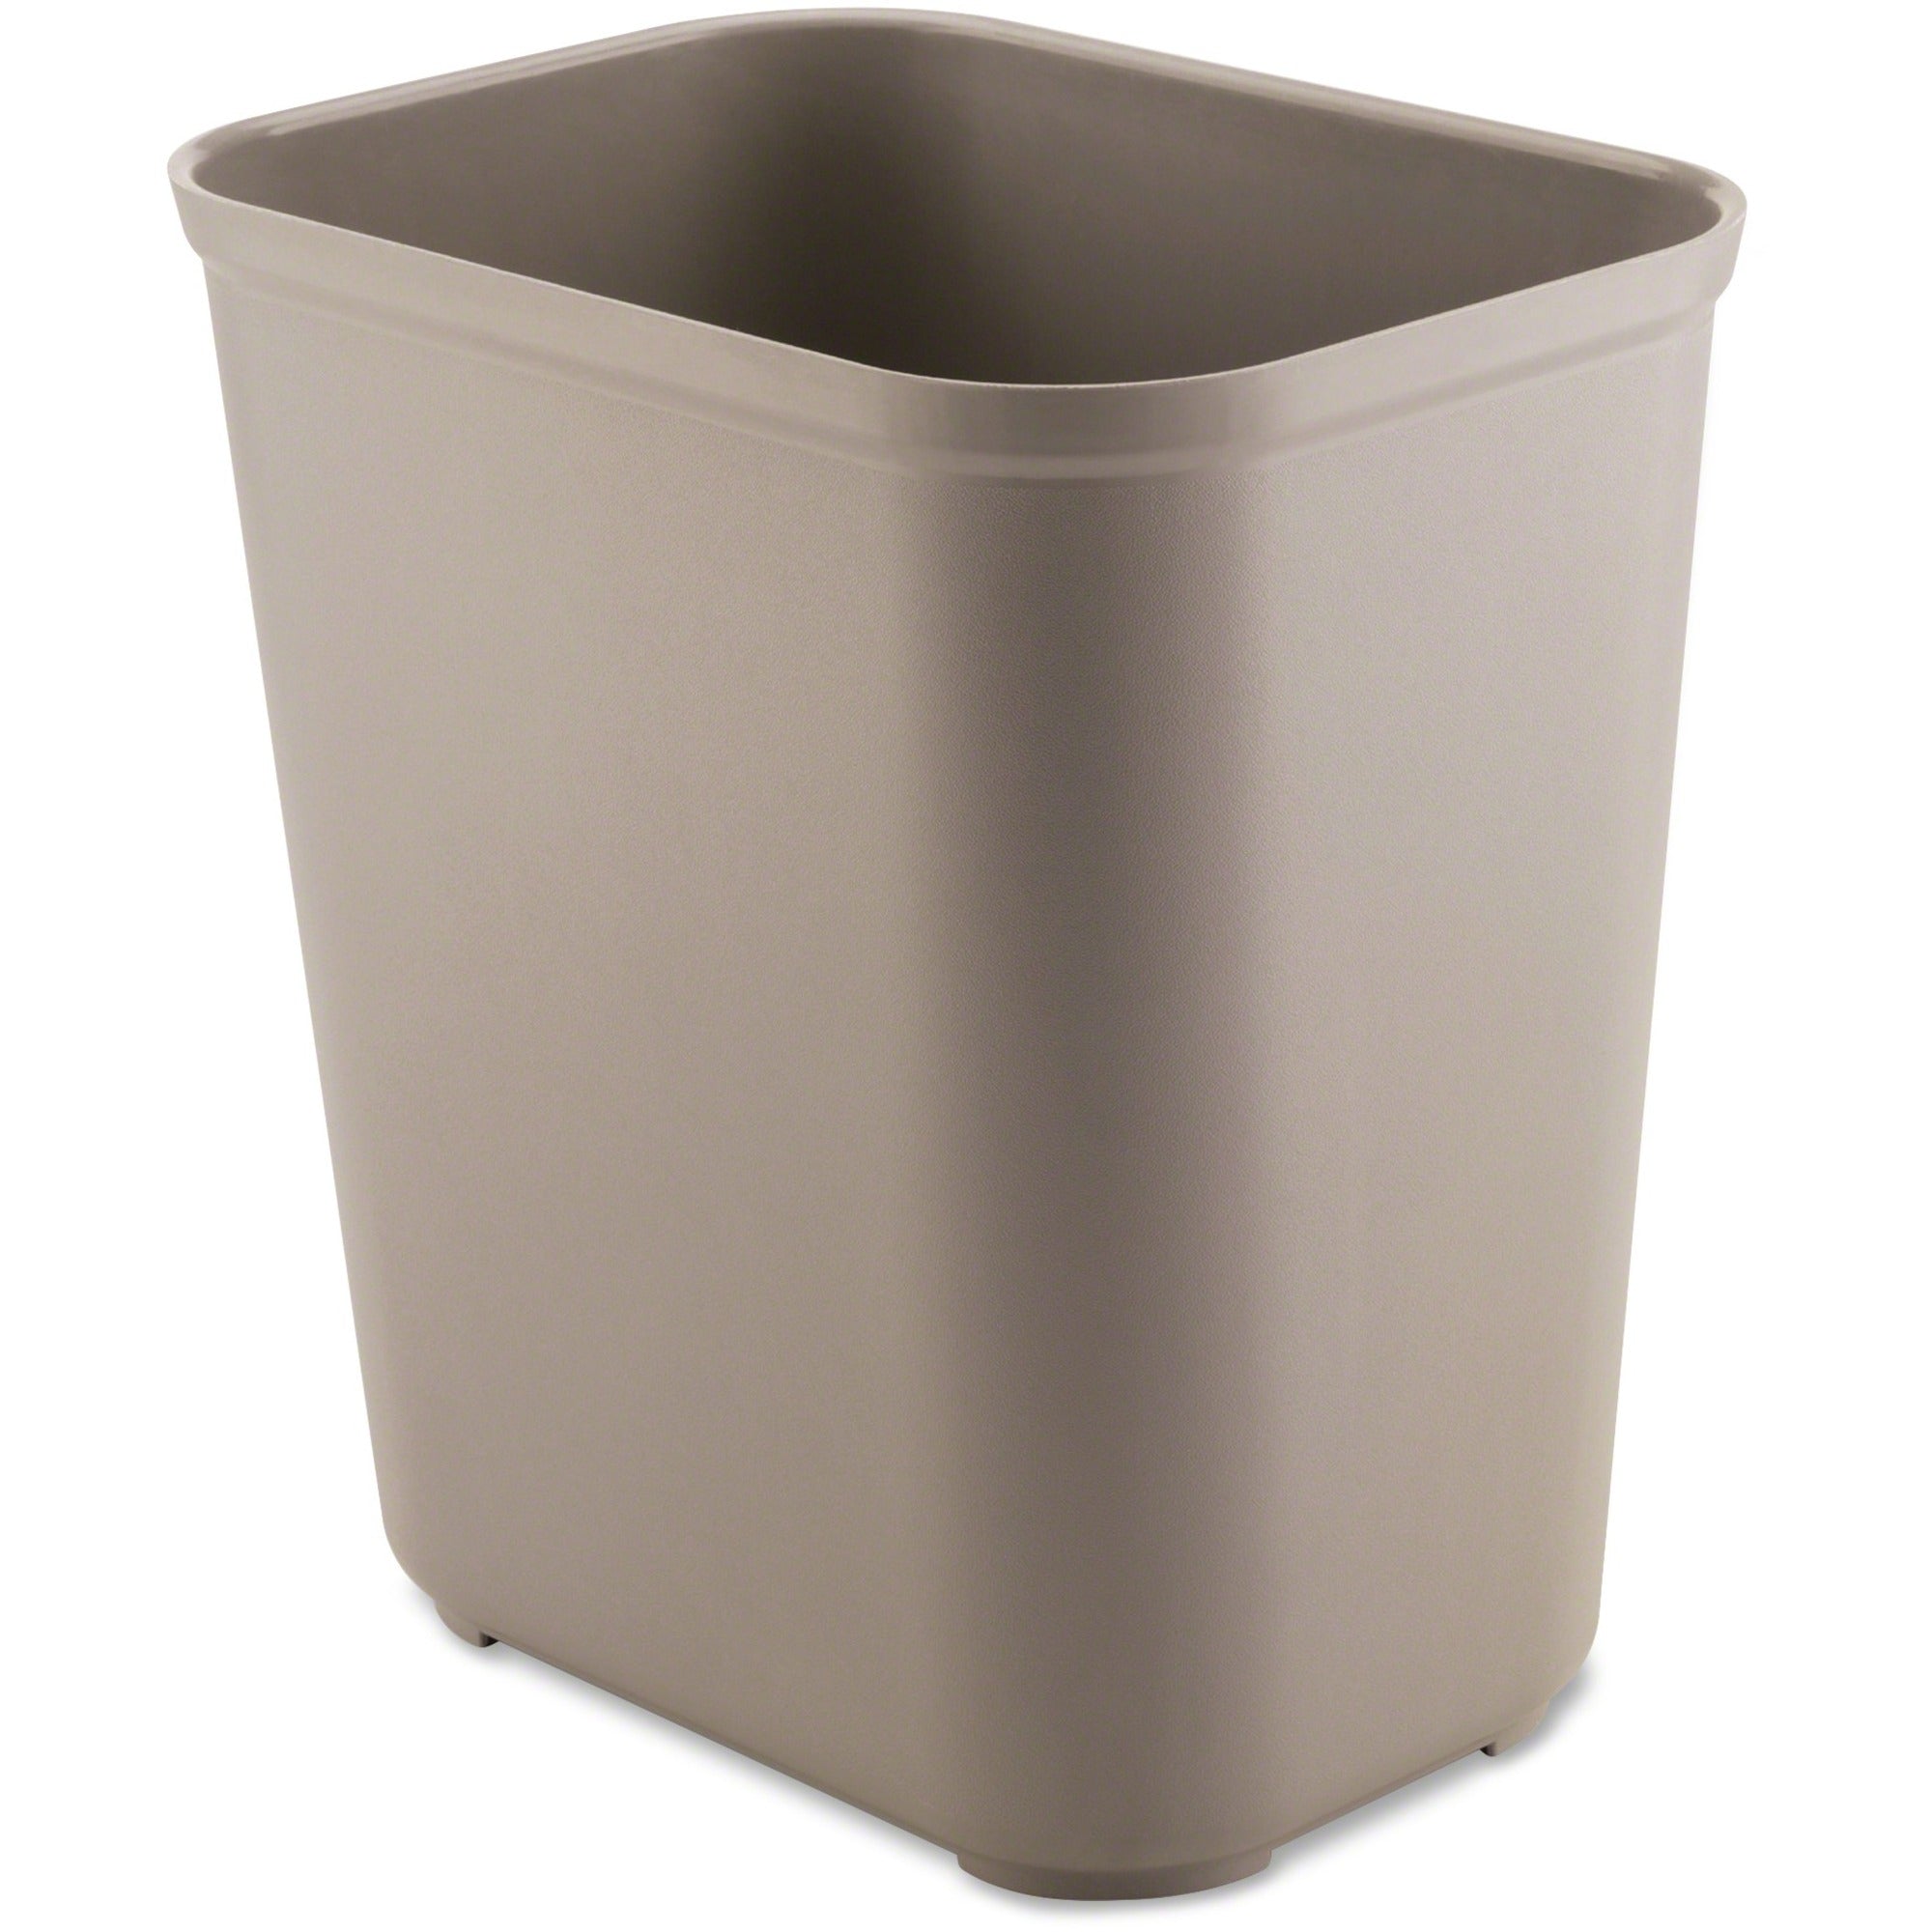 rubbermaid-commercial-28-qt-fire-resistant-wastebaskets-7-gal-capacity-rectangular-impact-resistant-rust-resistant-dent-resistant-155-height-x-105-width-x-145-depth-thermoset-polyester-beige-6-carton_rcp254300bgct - 1